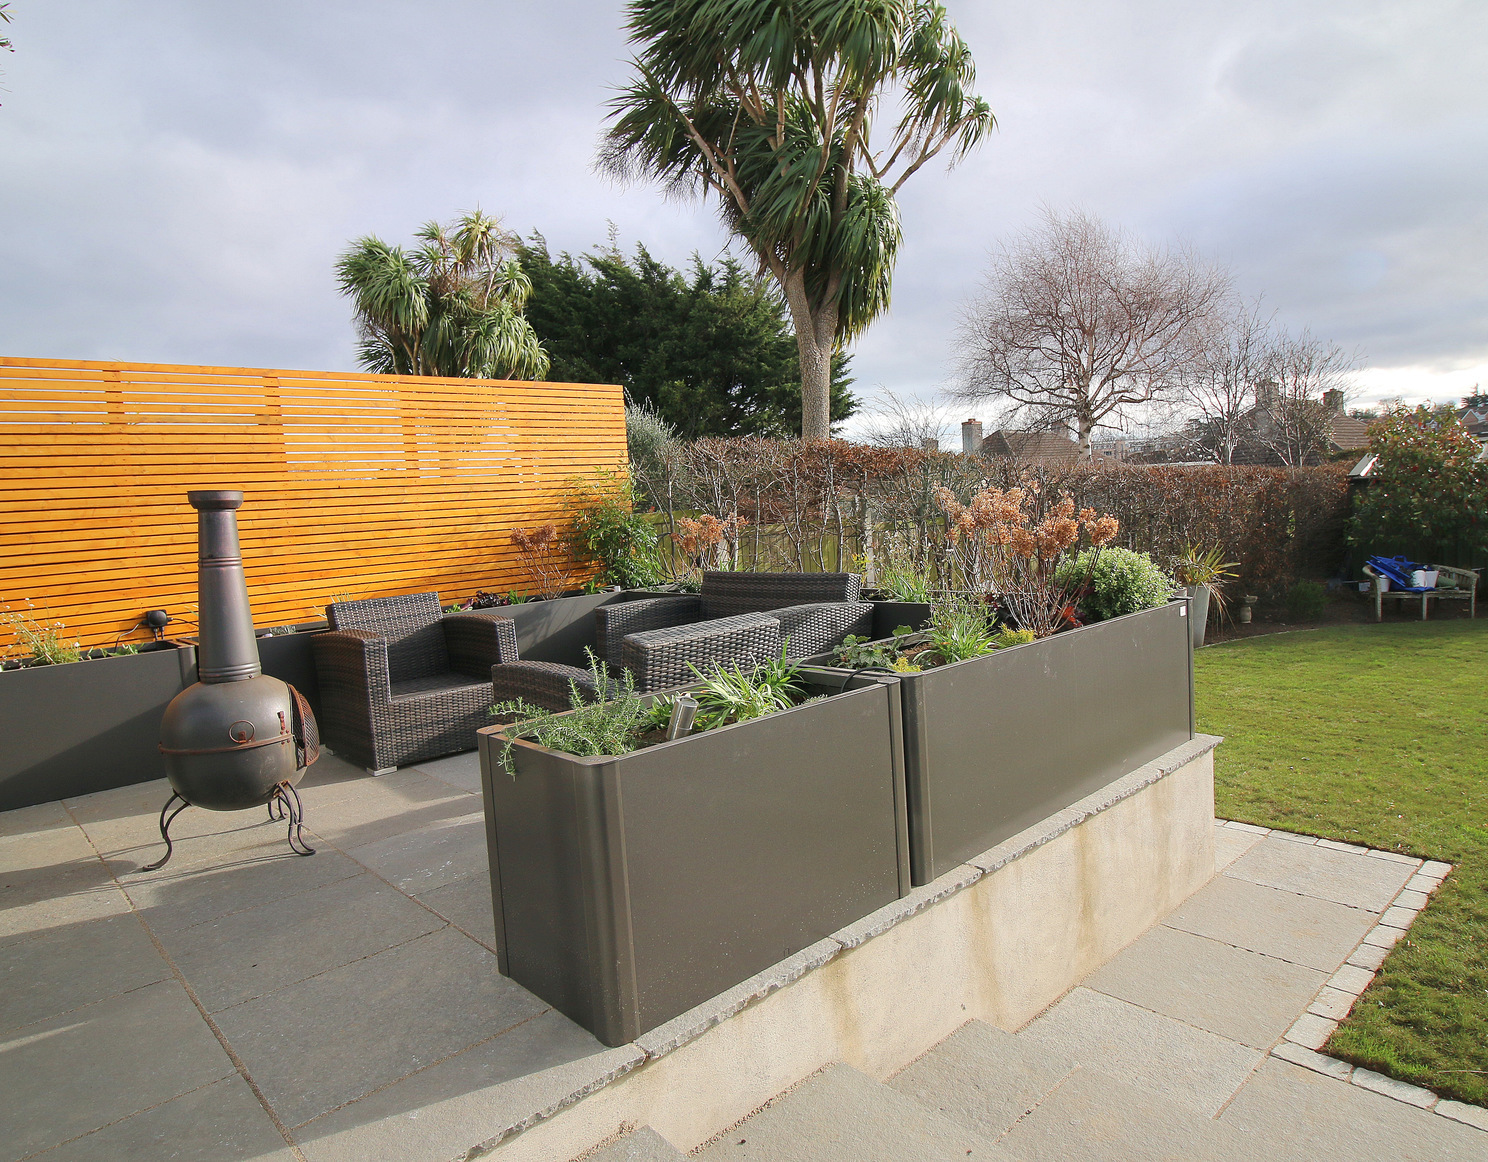 Biohort Belvedere Planters - exceptional quality, modern steel garden planters | Supplied + Fitted in Mount Merrion, Co Dublin.